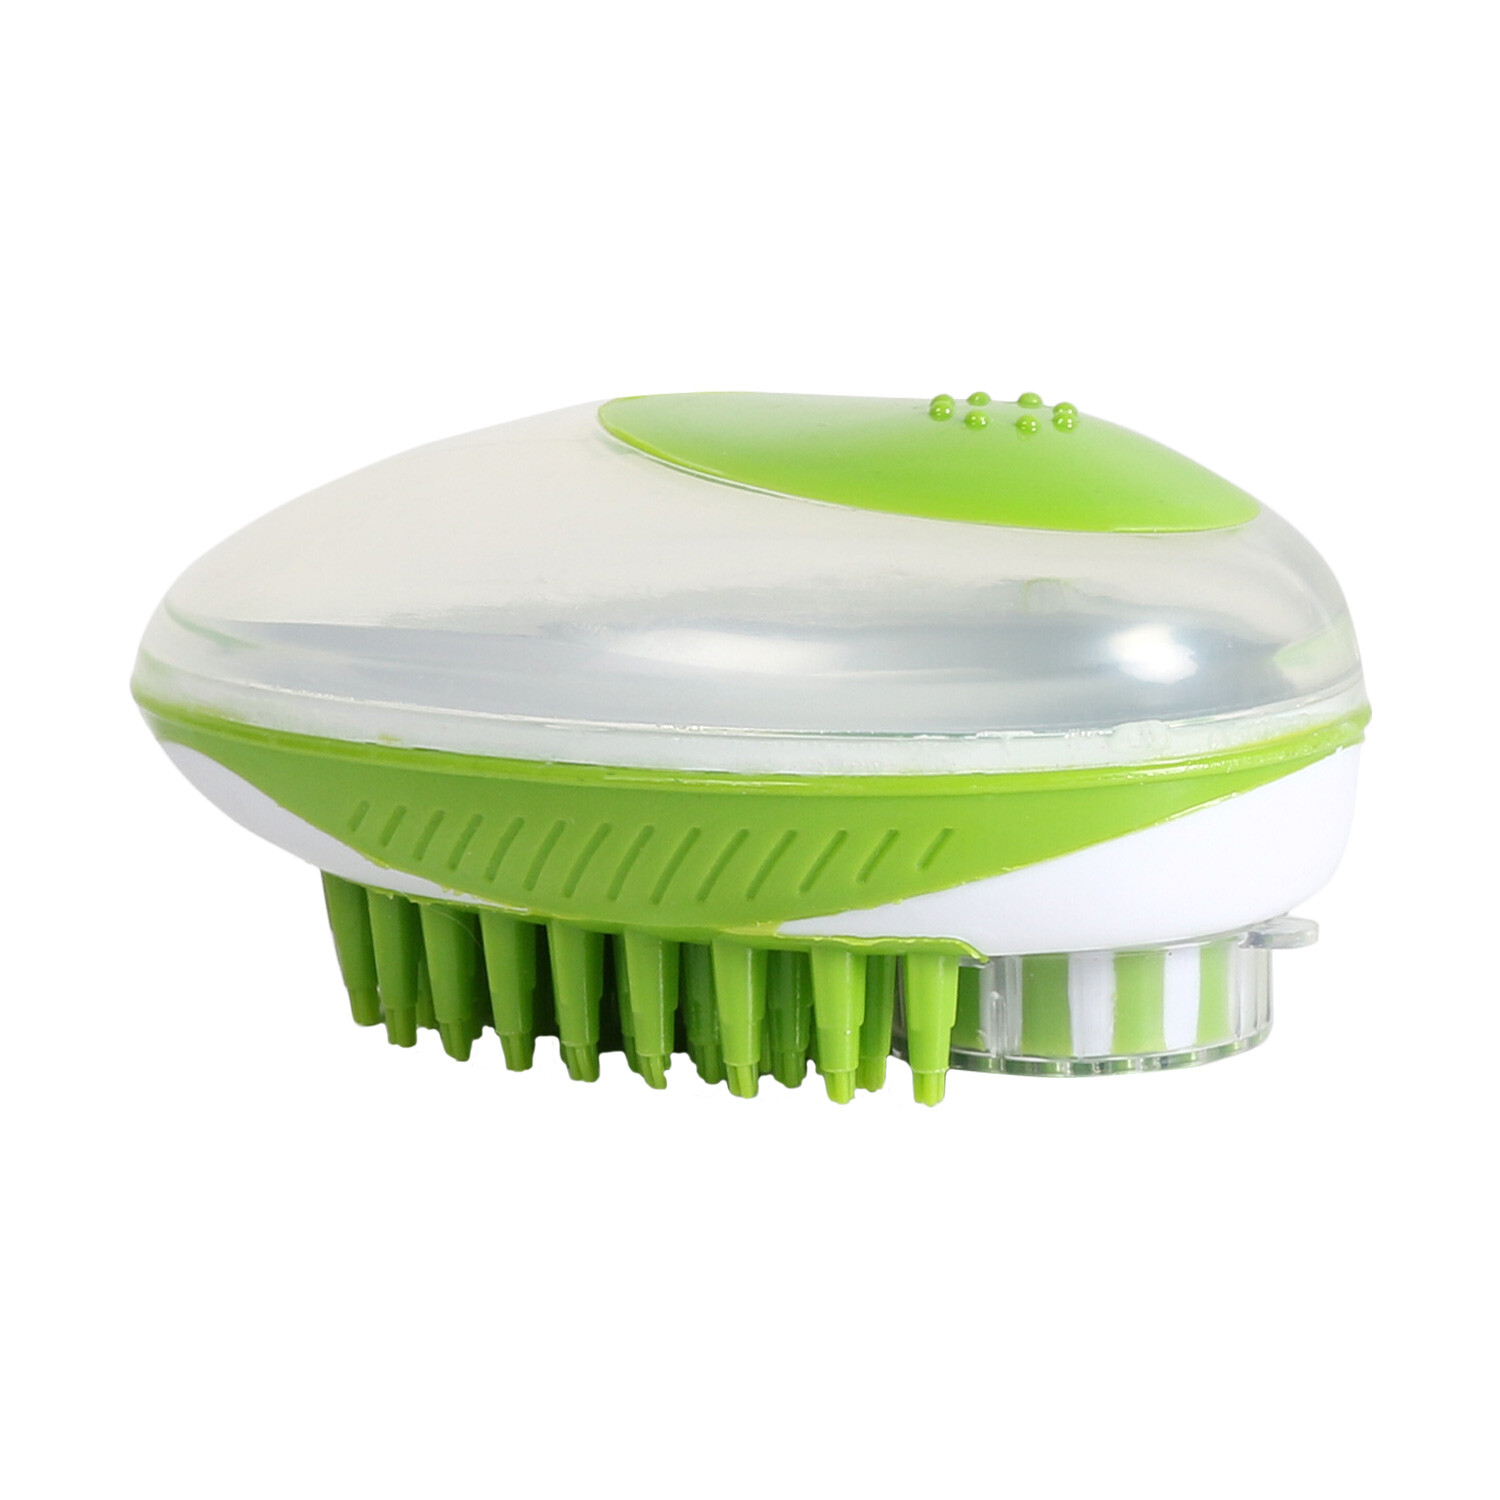 Single Clever Paws 2 in 1 Shampoo Grooming Brush in Assorted styles Image 3